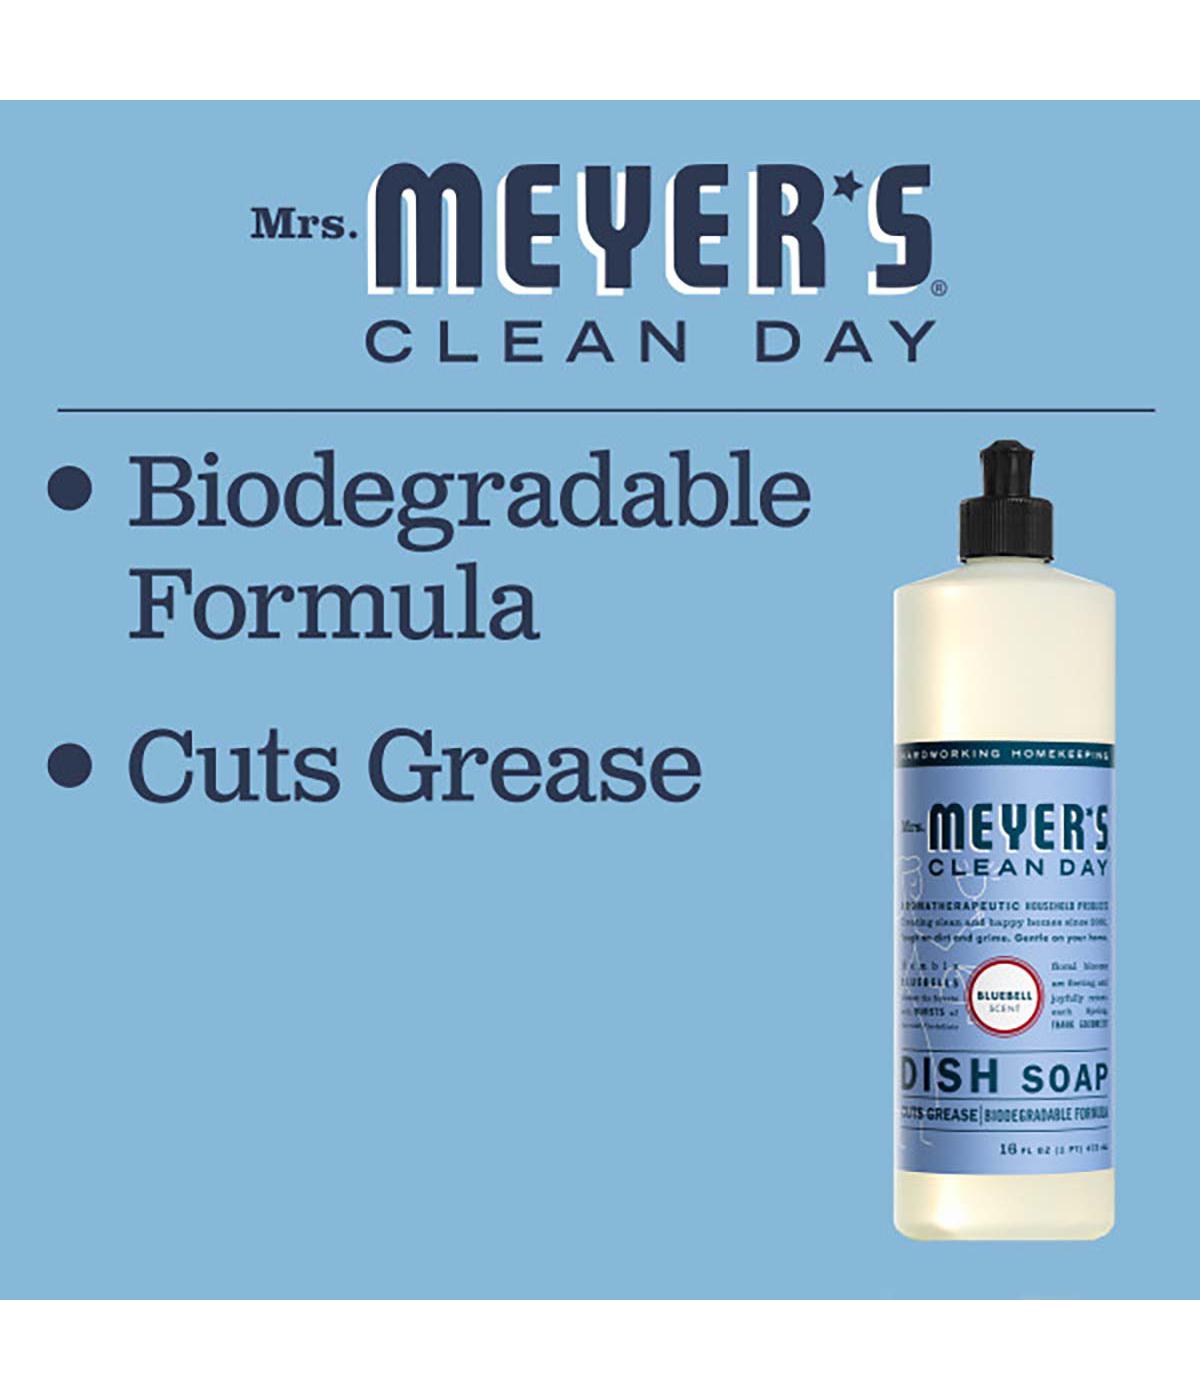 Mrs. Meyer's Clean Day Bluebell Scent Dish Soap; image 5 of 6